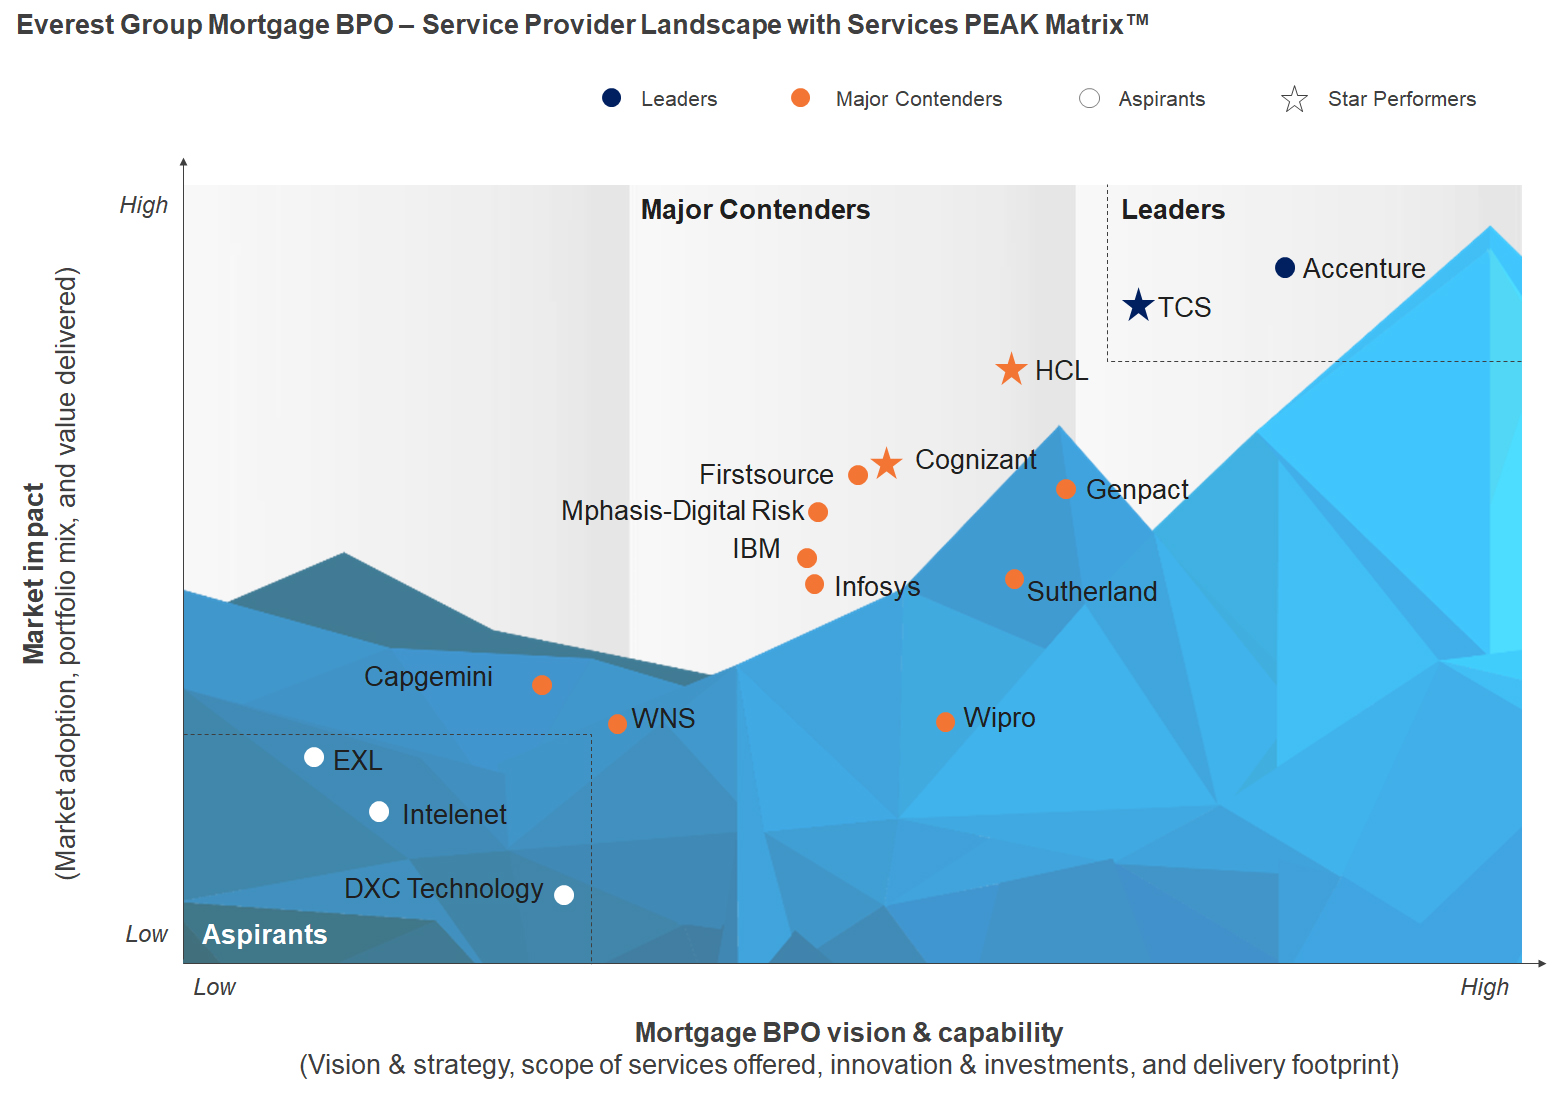 Accenture has again been named a leader in business mortgage process outsourcing (BPO) in a recent report from industry analyst firm Everest Group